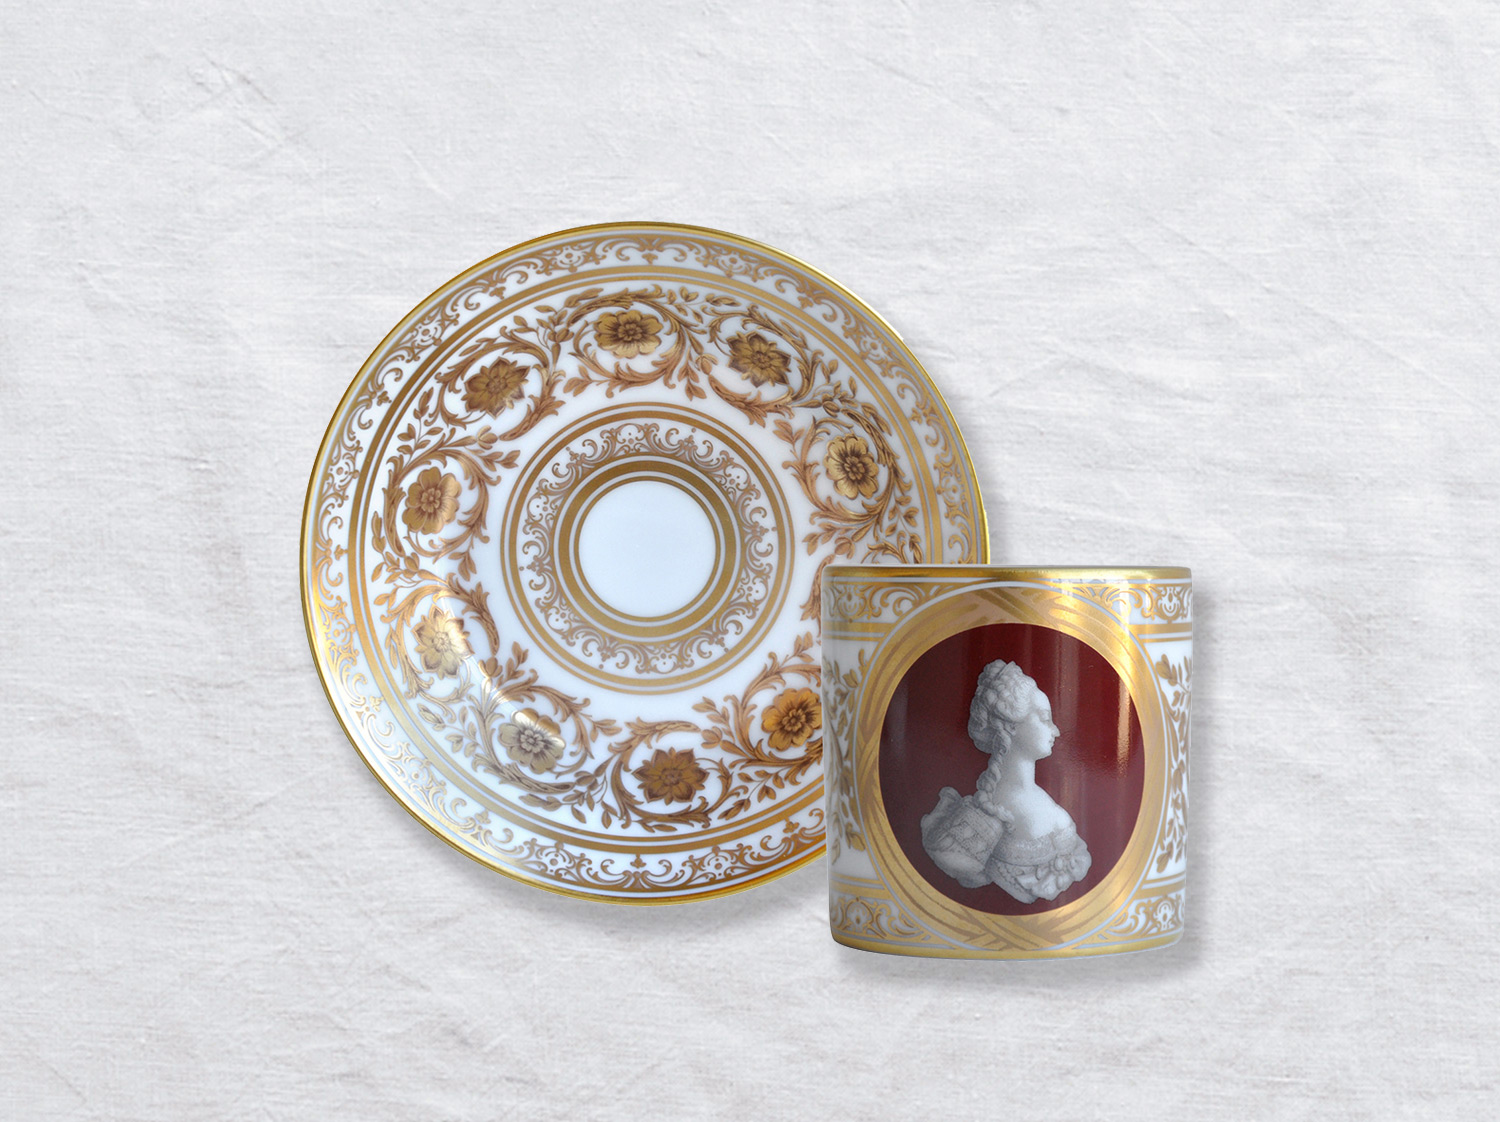 China Litron cup and saucer of the collection A LA REINE MARIE-ANTOINETTE | Bernardaud